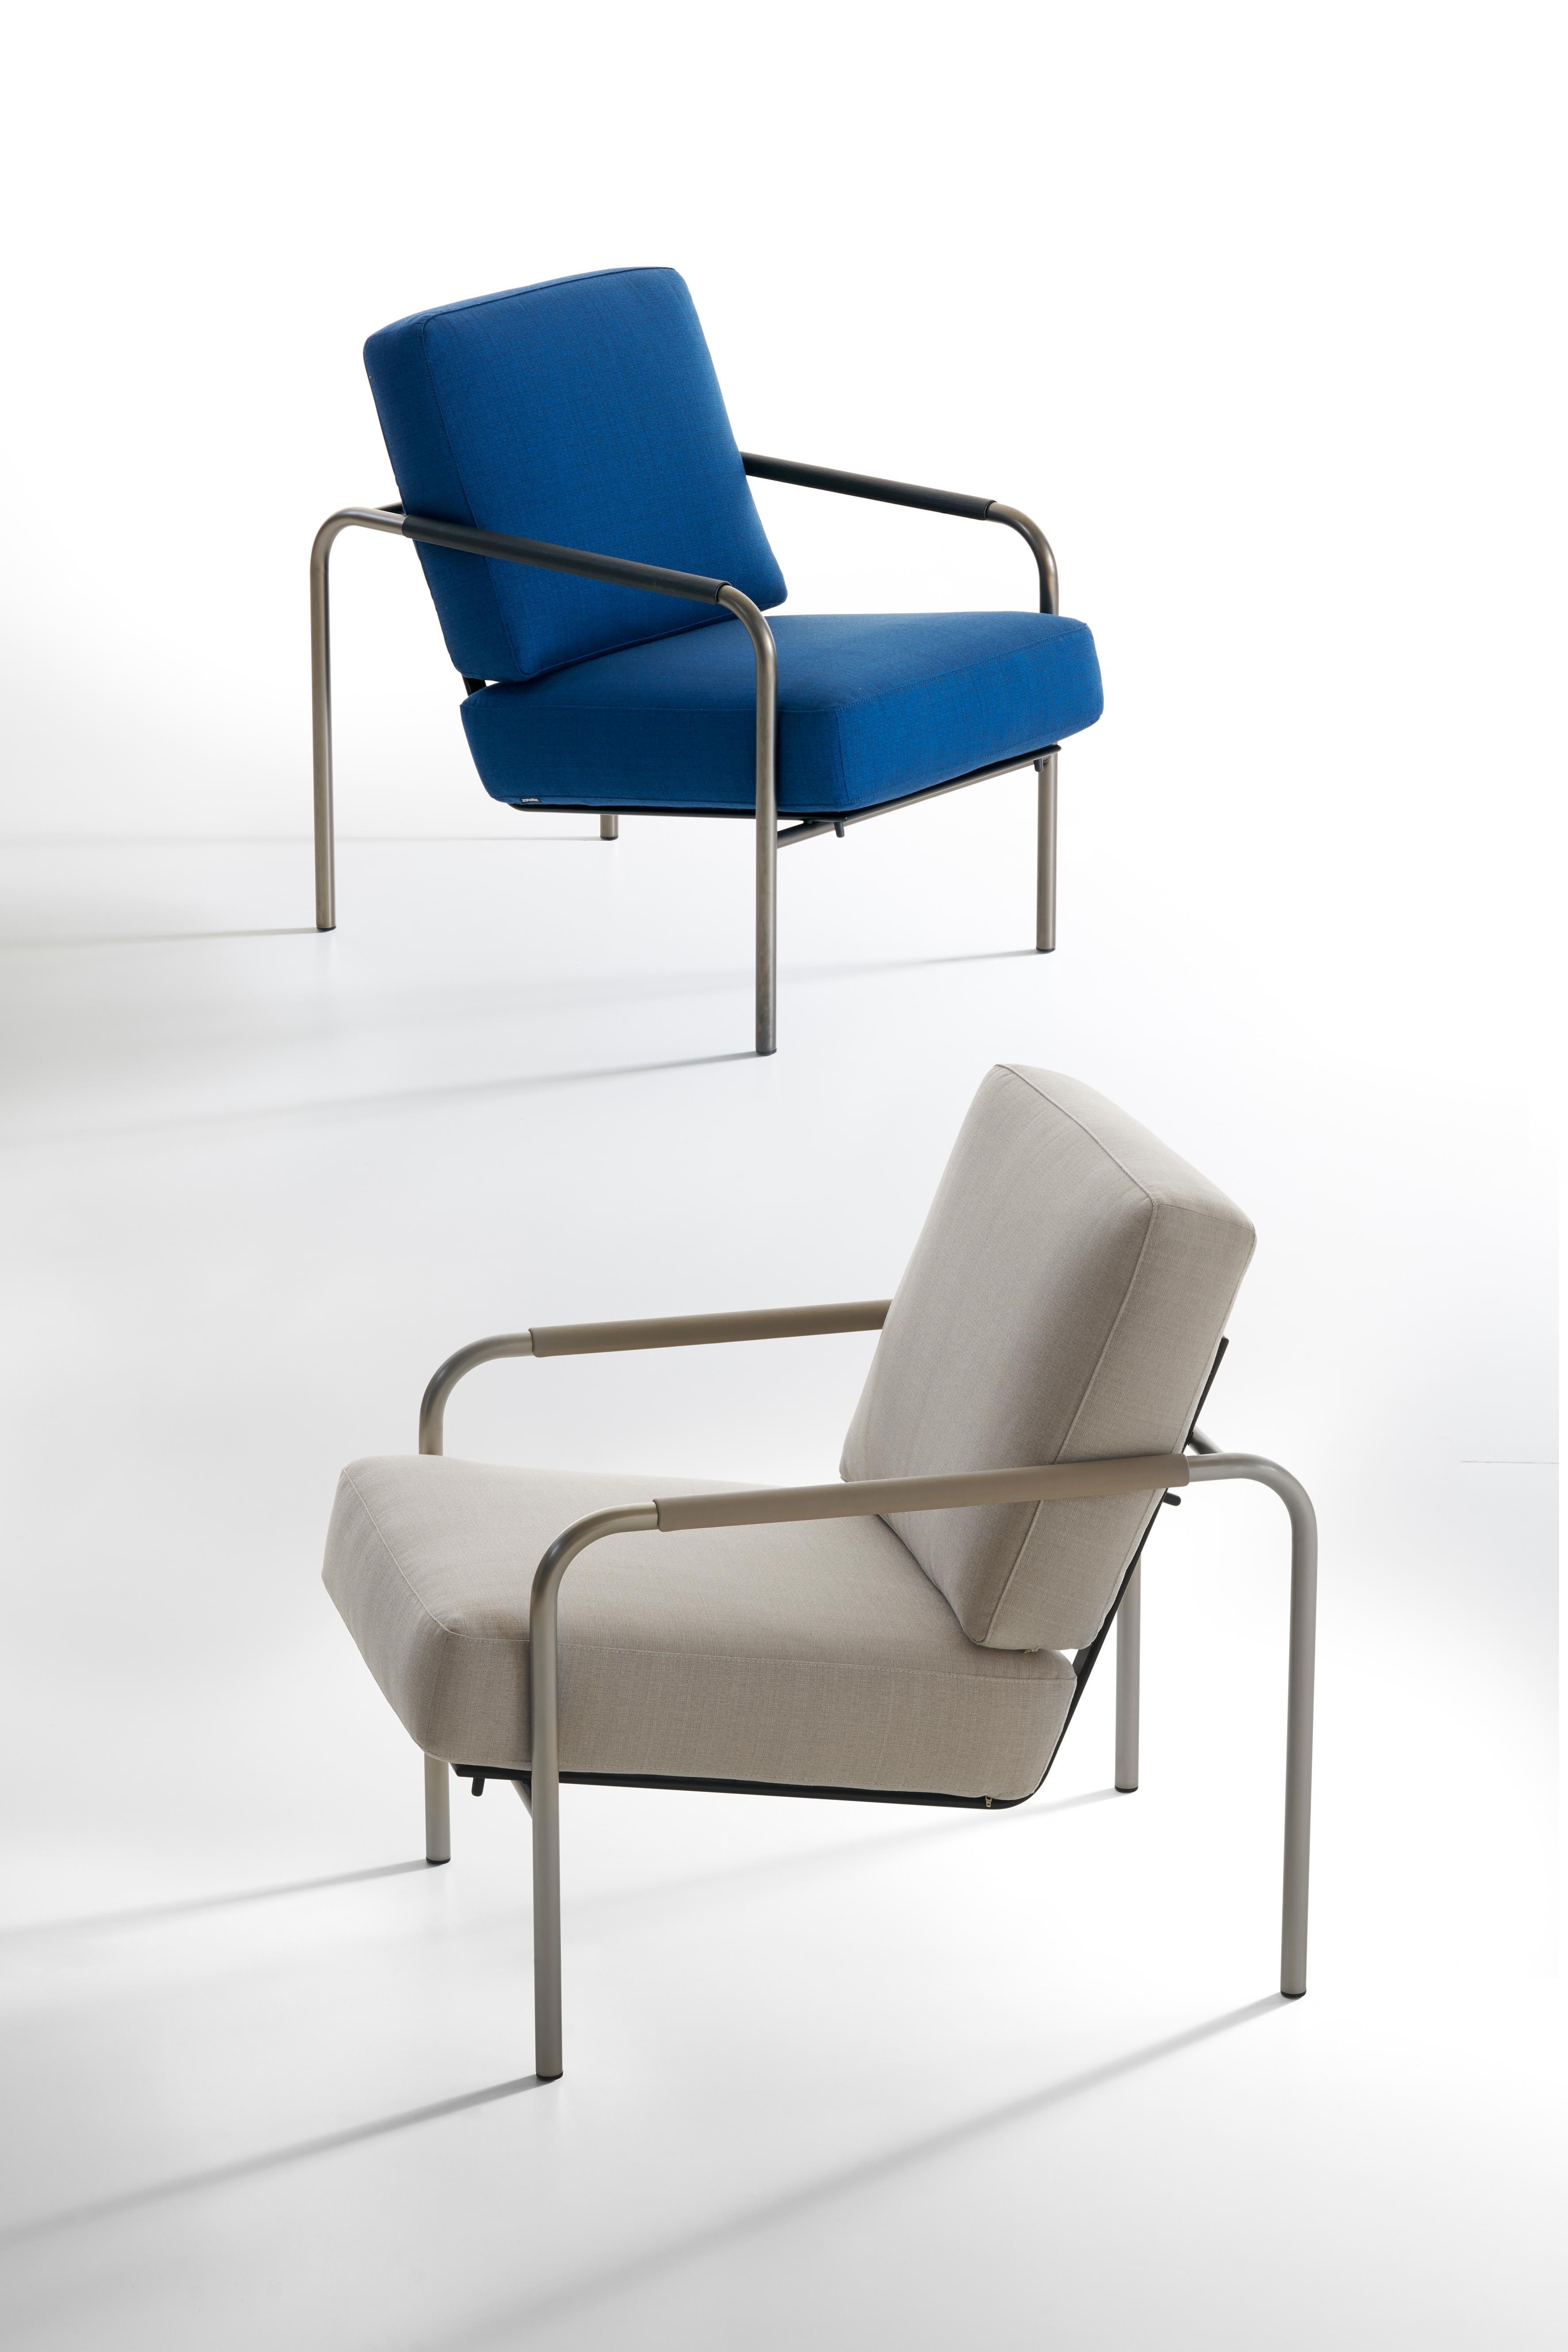 Zanotta Susanna Armchair in Teolo 30607 Fabric & Nickel-Satin Finished Frame

Frame in chromium-plated, or in natural or black nickel- satin finished, or black painted tubular steel. Adjustable two- position cushion support in black painted steel.